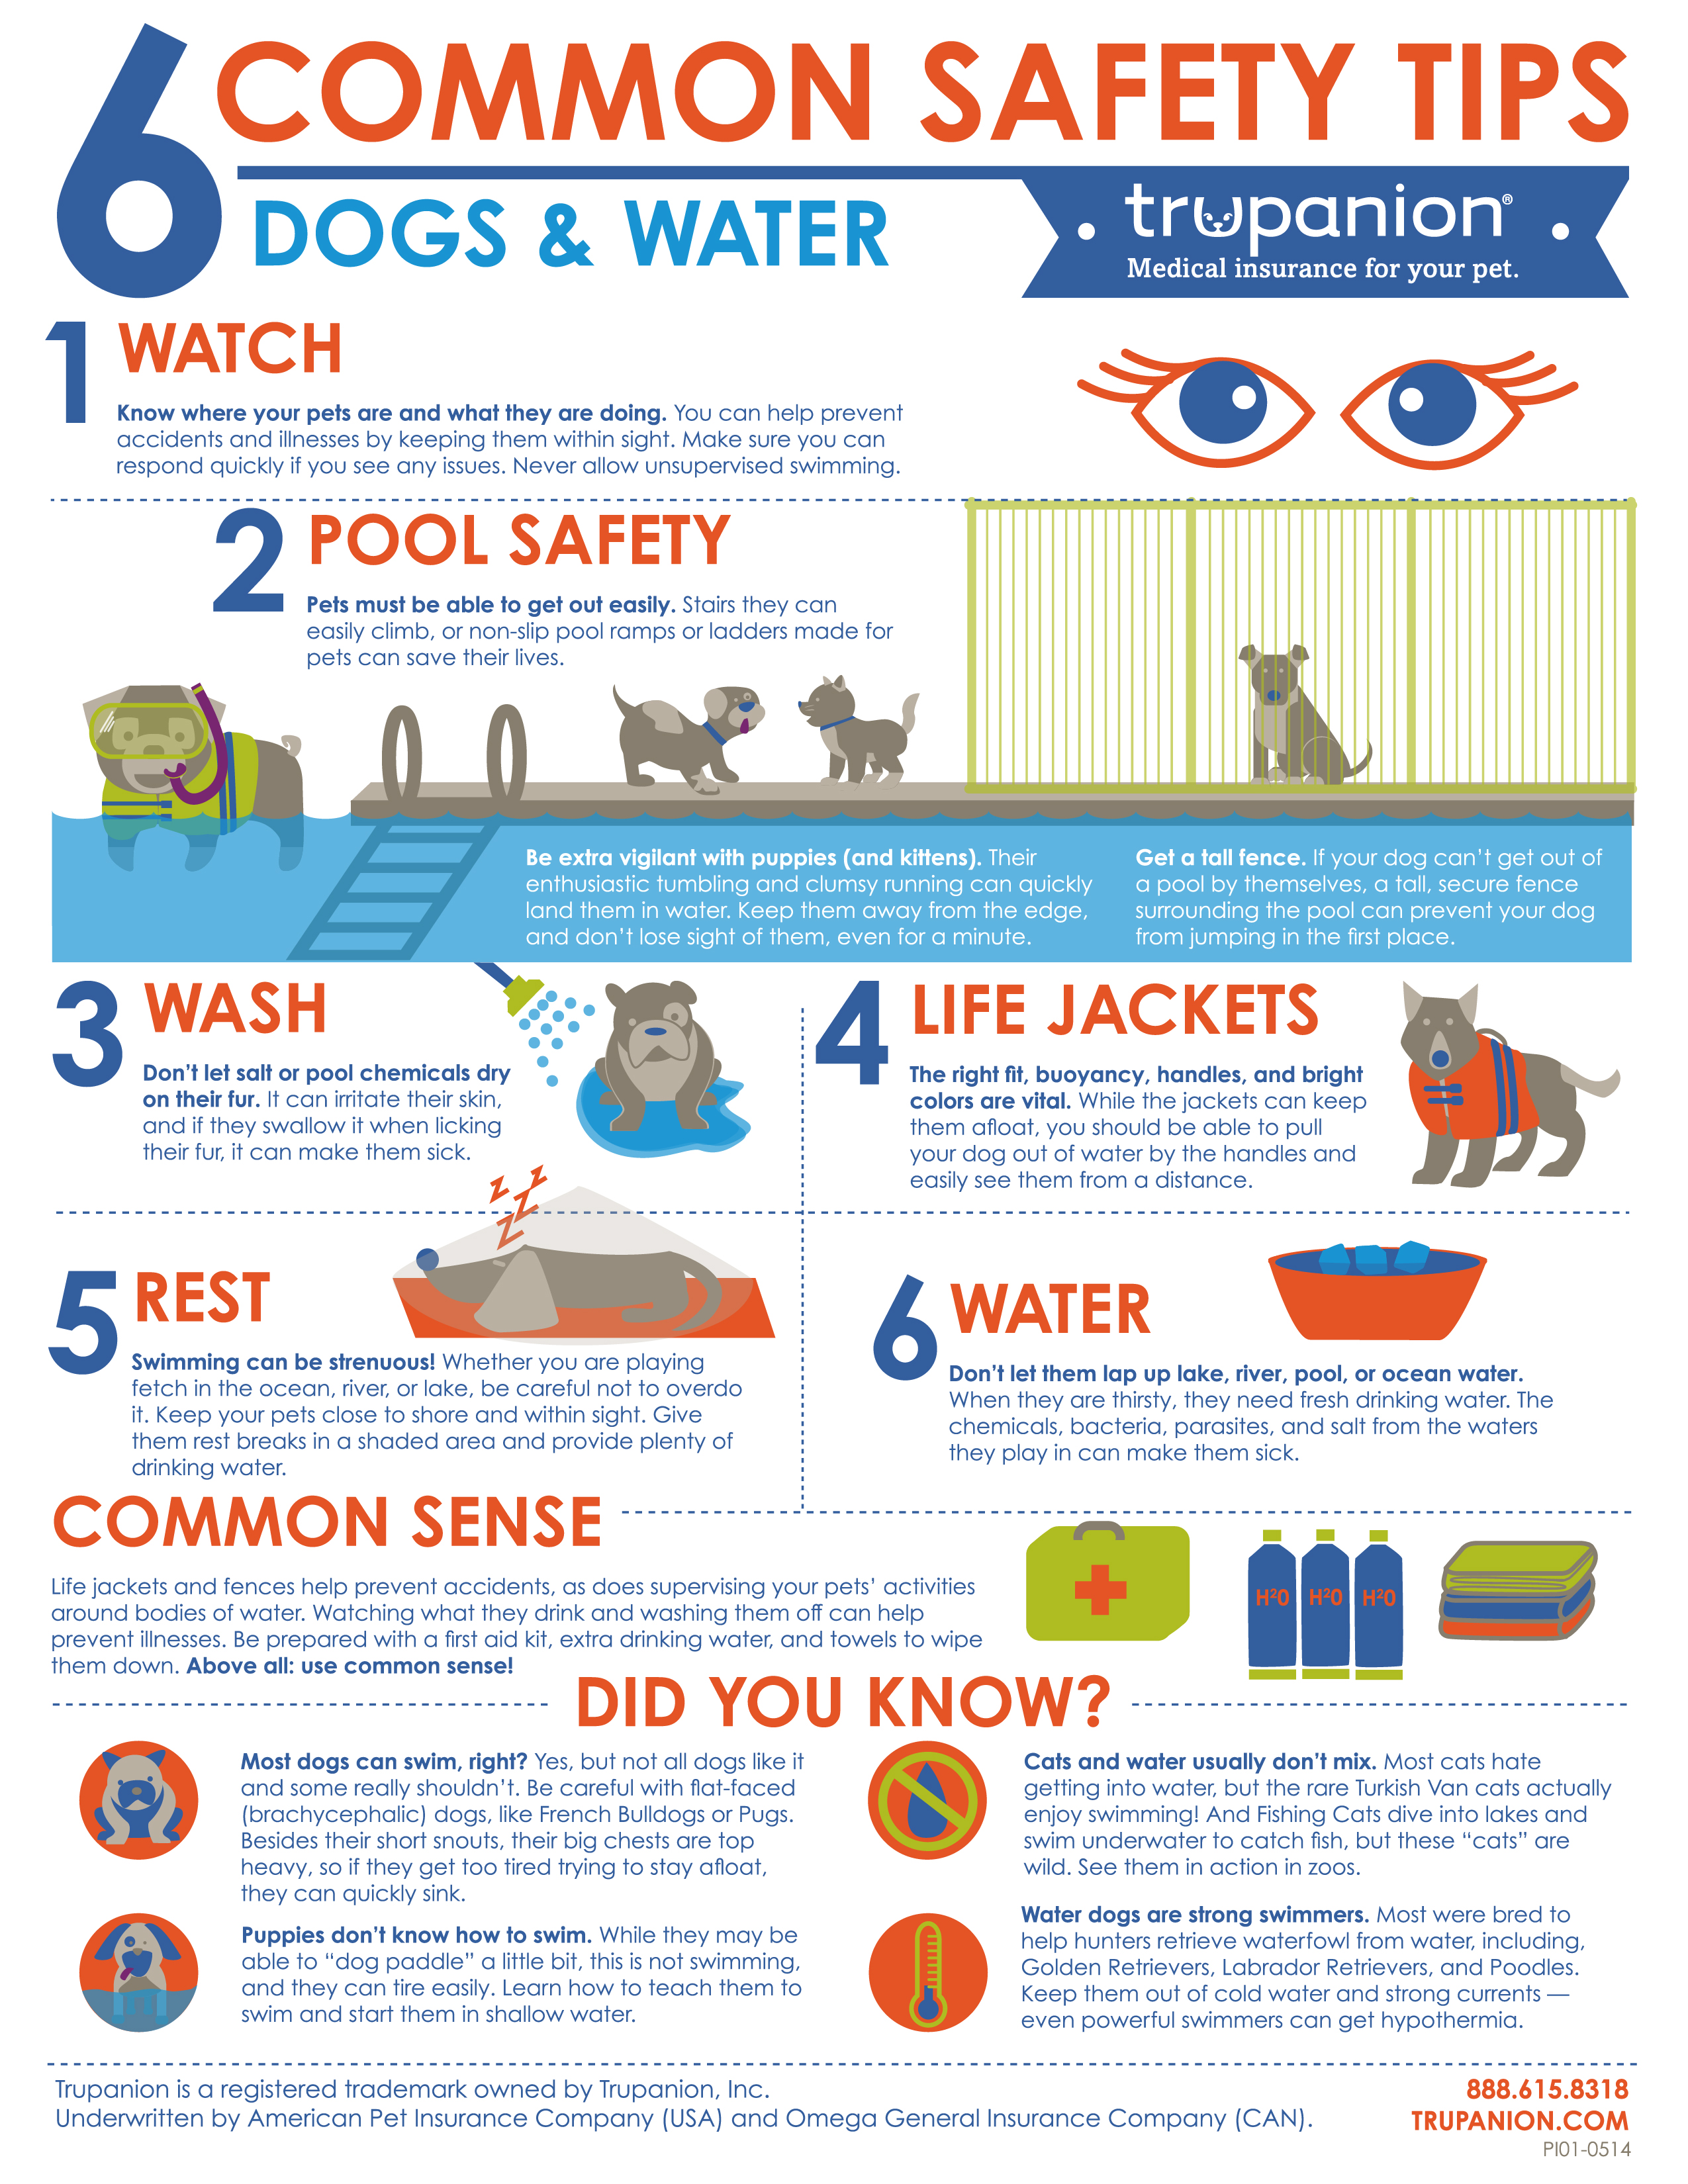 Water Safety Tips from Trupanion